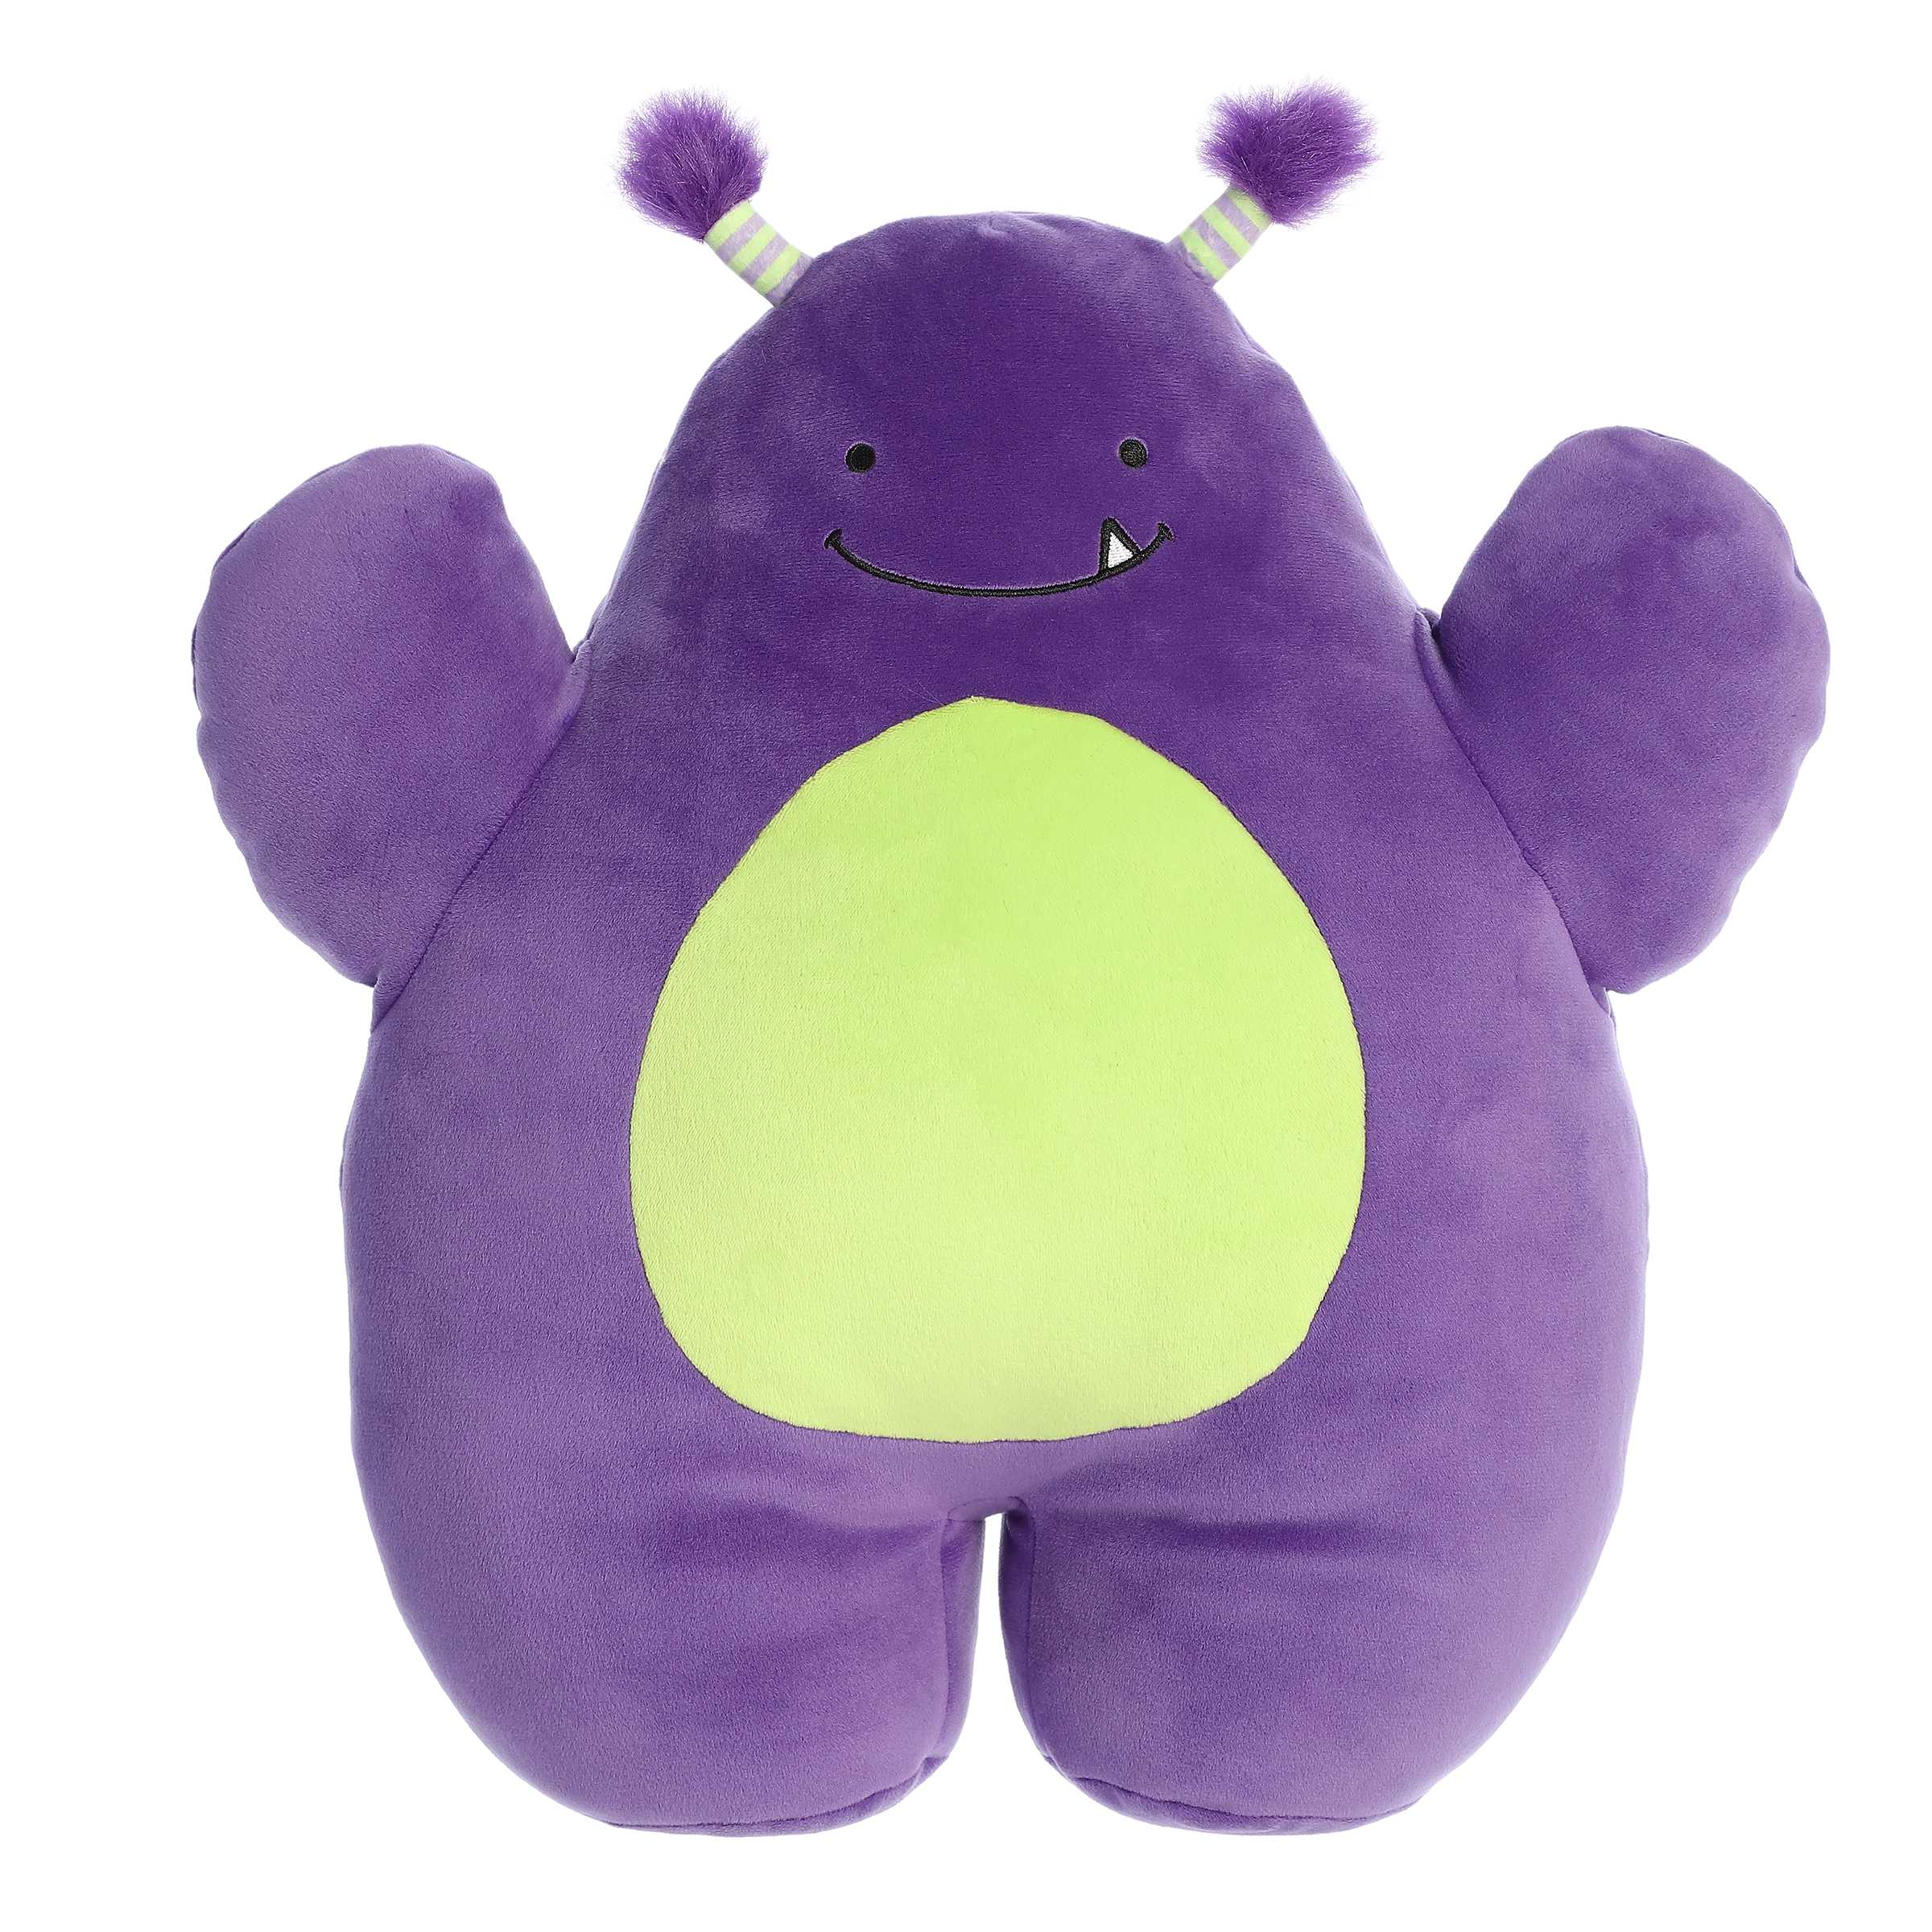 Cuddly soft monster plush toy with purple and green body, fluffy purple horns, and a smiling face with black accents